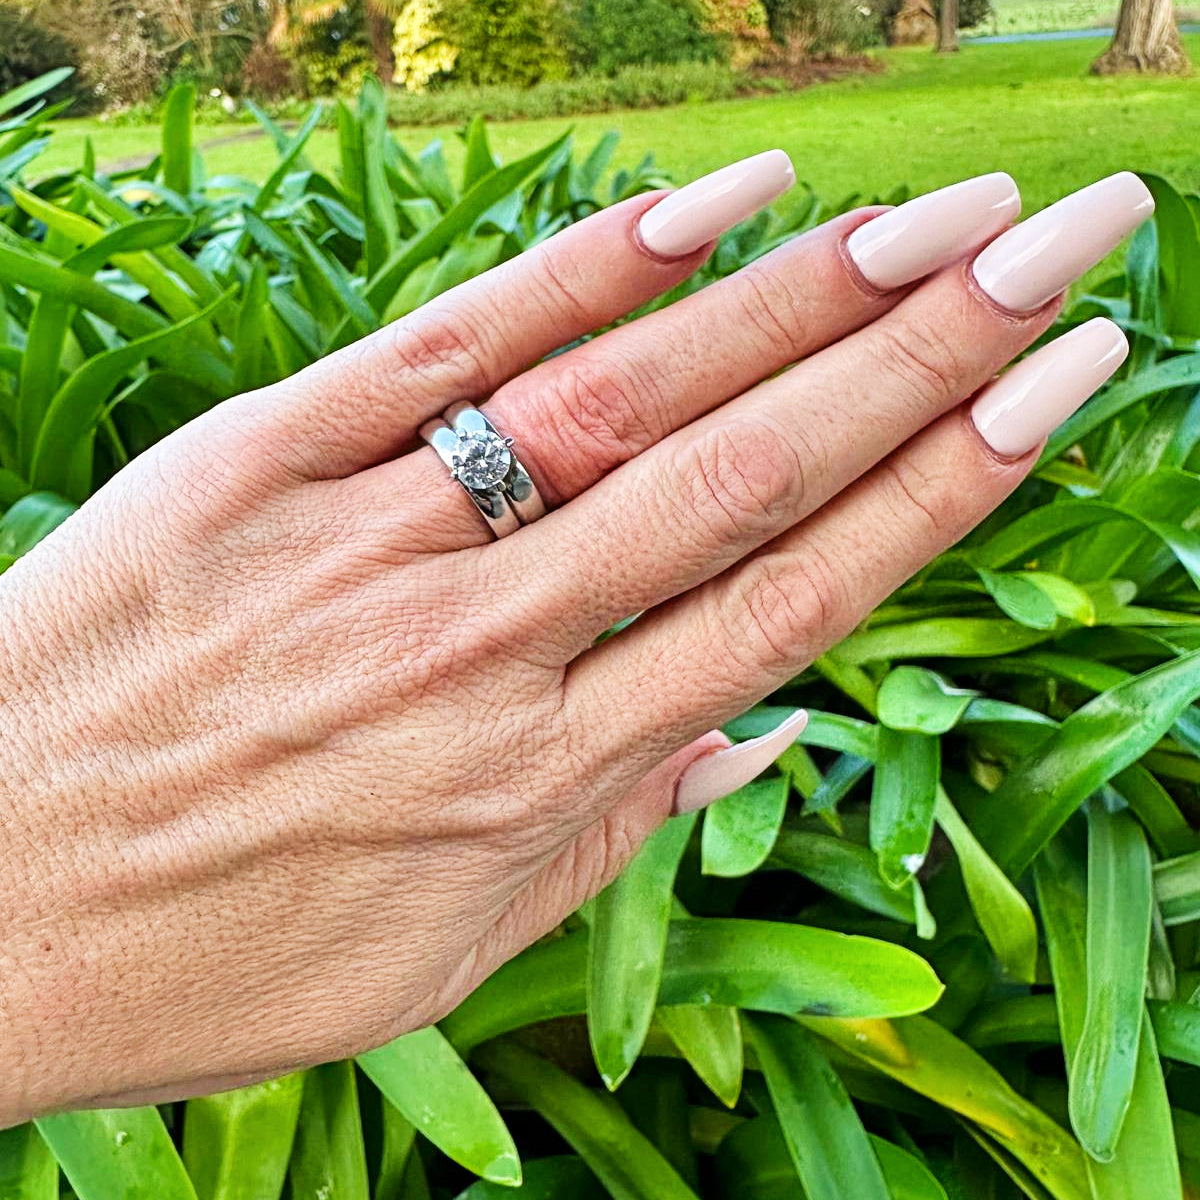 The Mimi Ring is a stunning 925 sterling silver ring that gives the illusion of a two-ring set. Featuring a large, attention-grabbing 3-carat cubic zirconia stone. Worldwide shipping